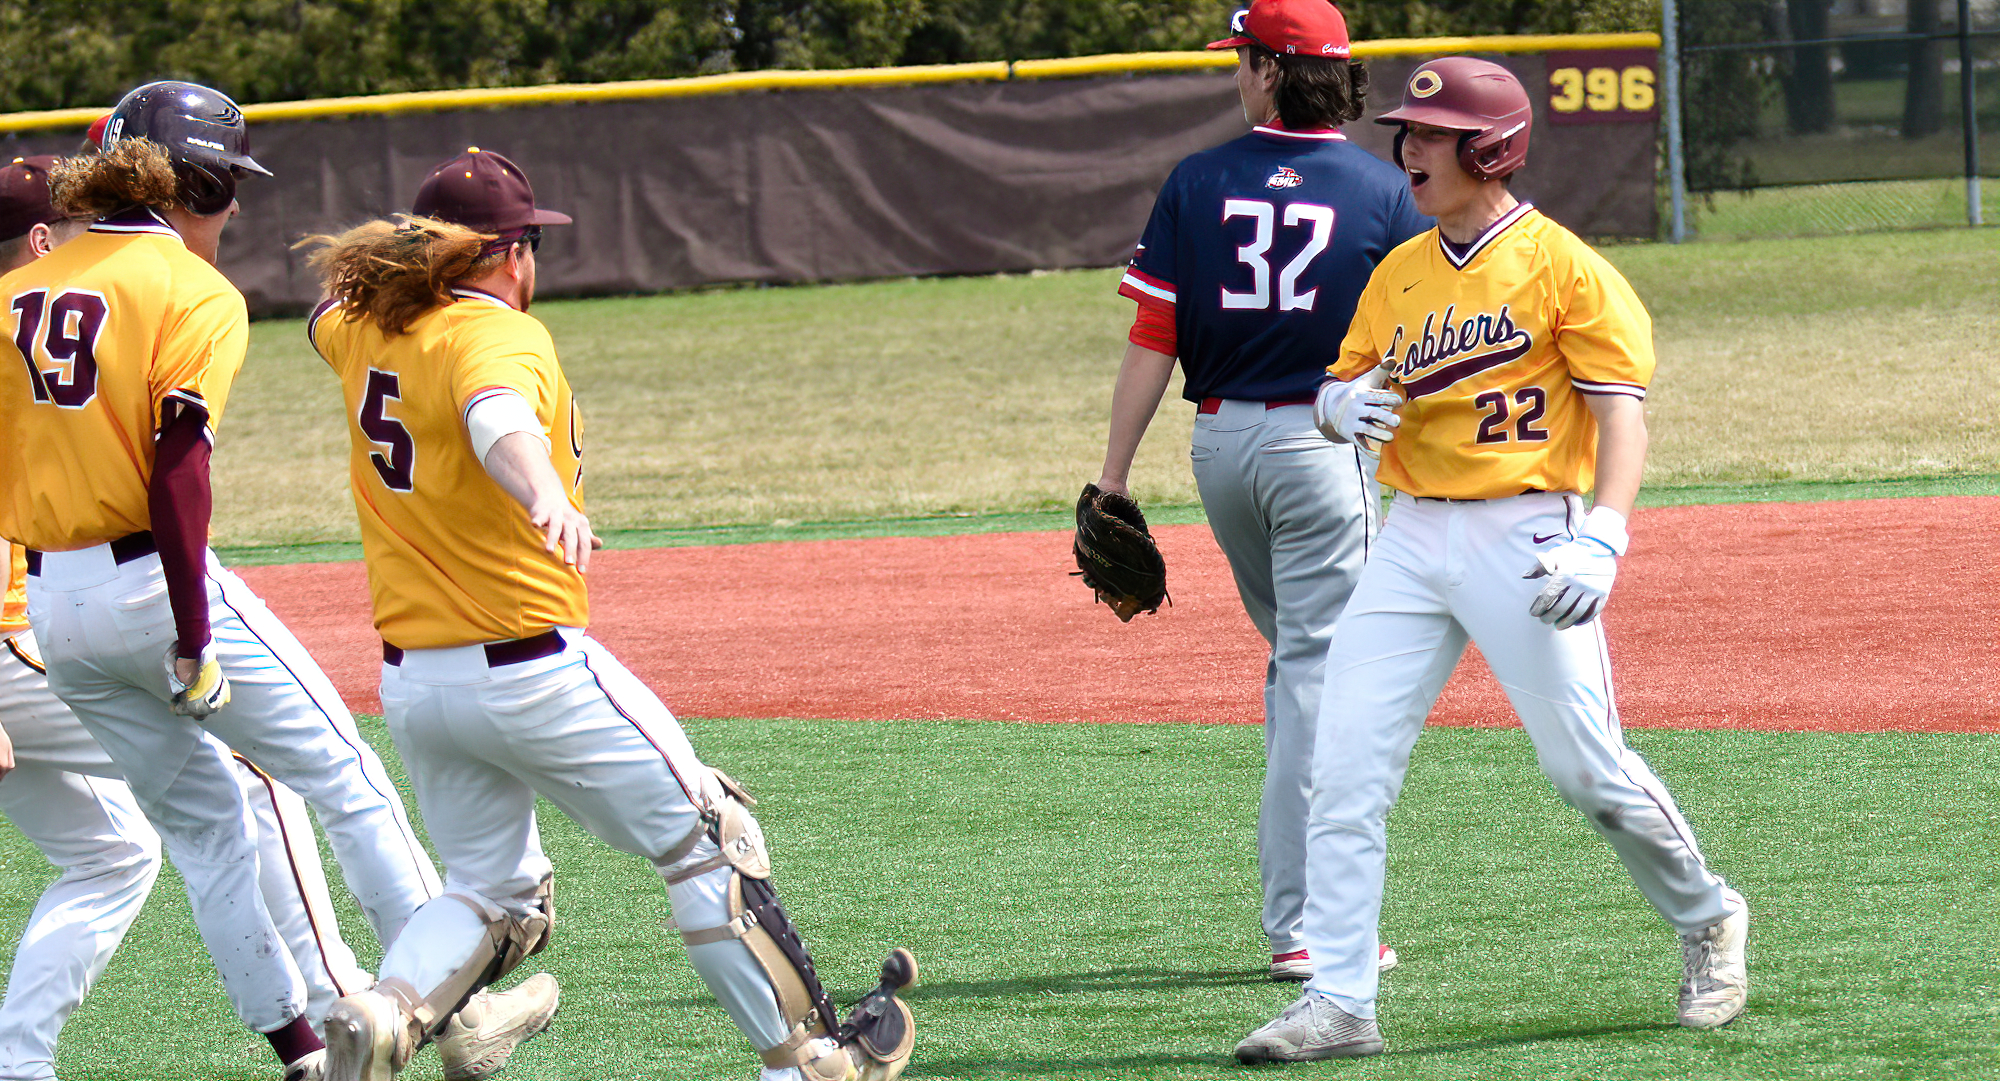 Jake Christianson (R) had a hit in each game to help Concordia sweep Hamilton. Christianson leads the team in batting average.